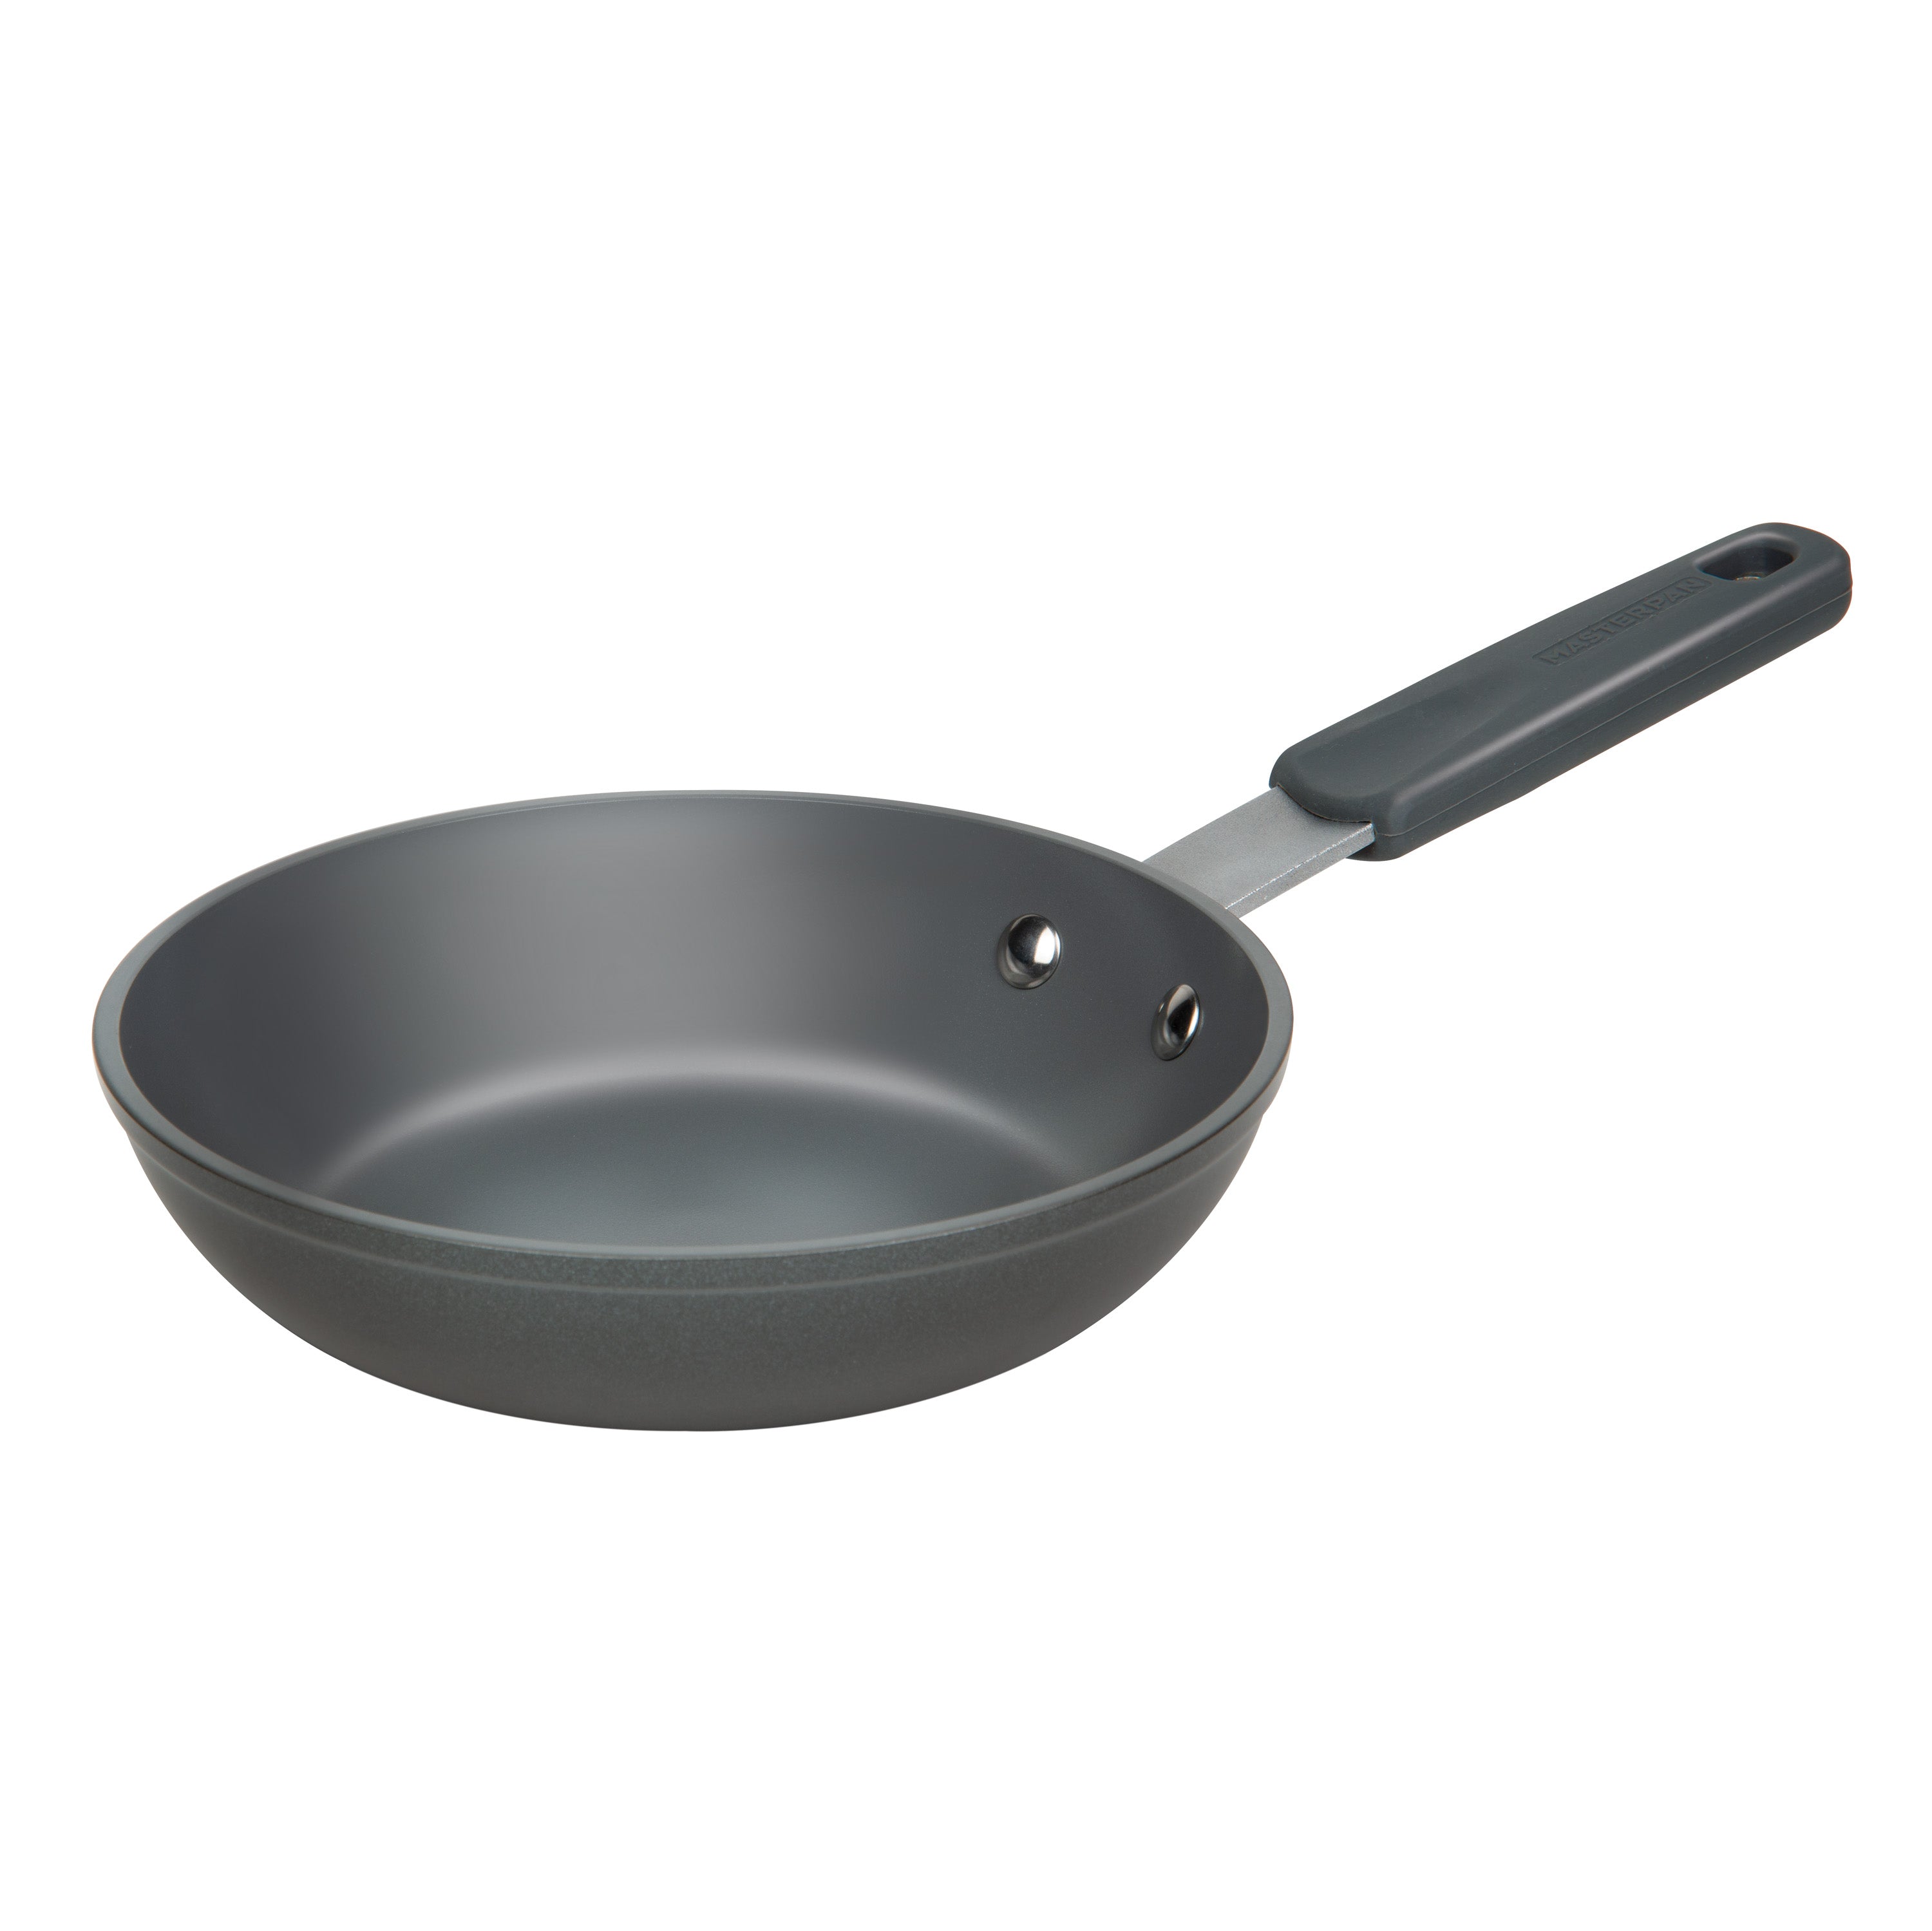 MasterPan 8 in. Healthy Ceramic Non-Stick Aluminium Cookware Fry Pan & Skillet with Stainless Steel Chefs Handle